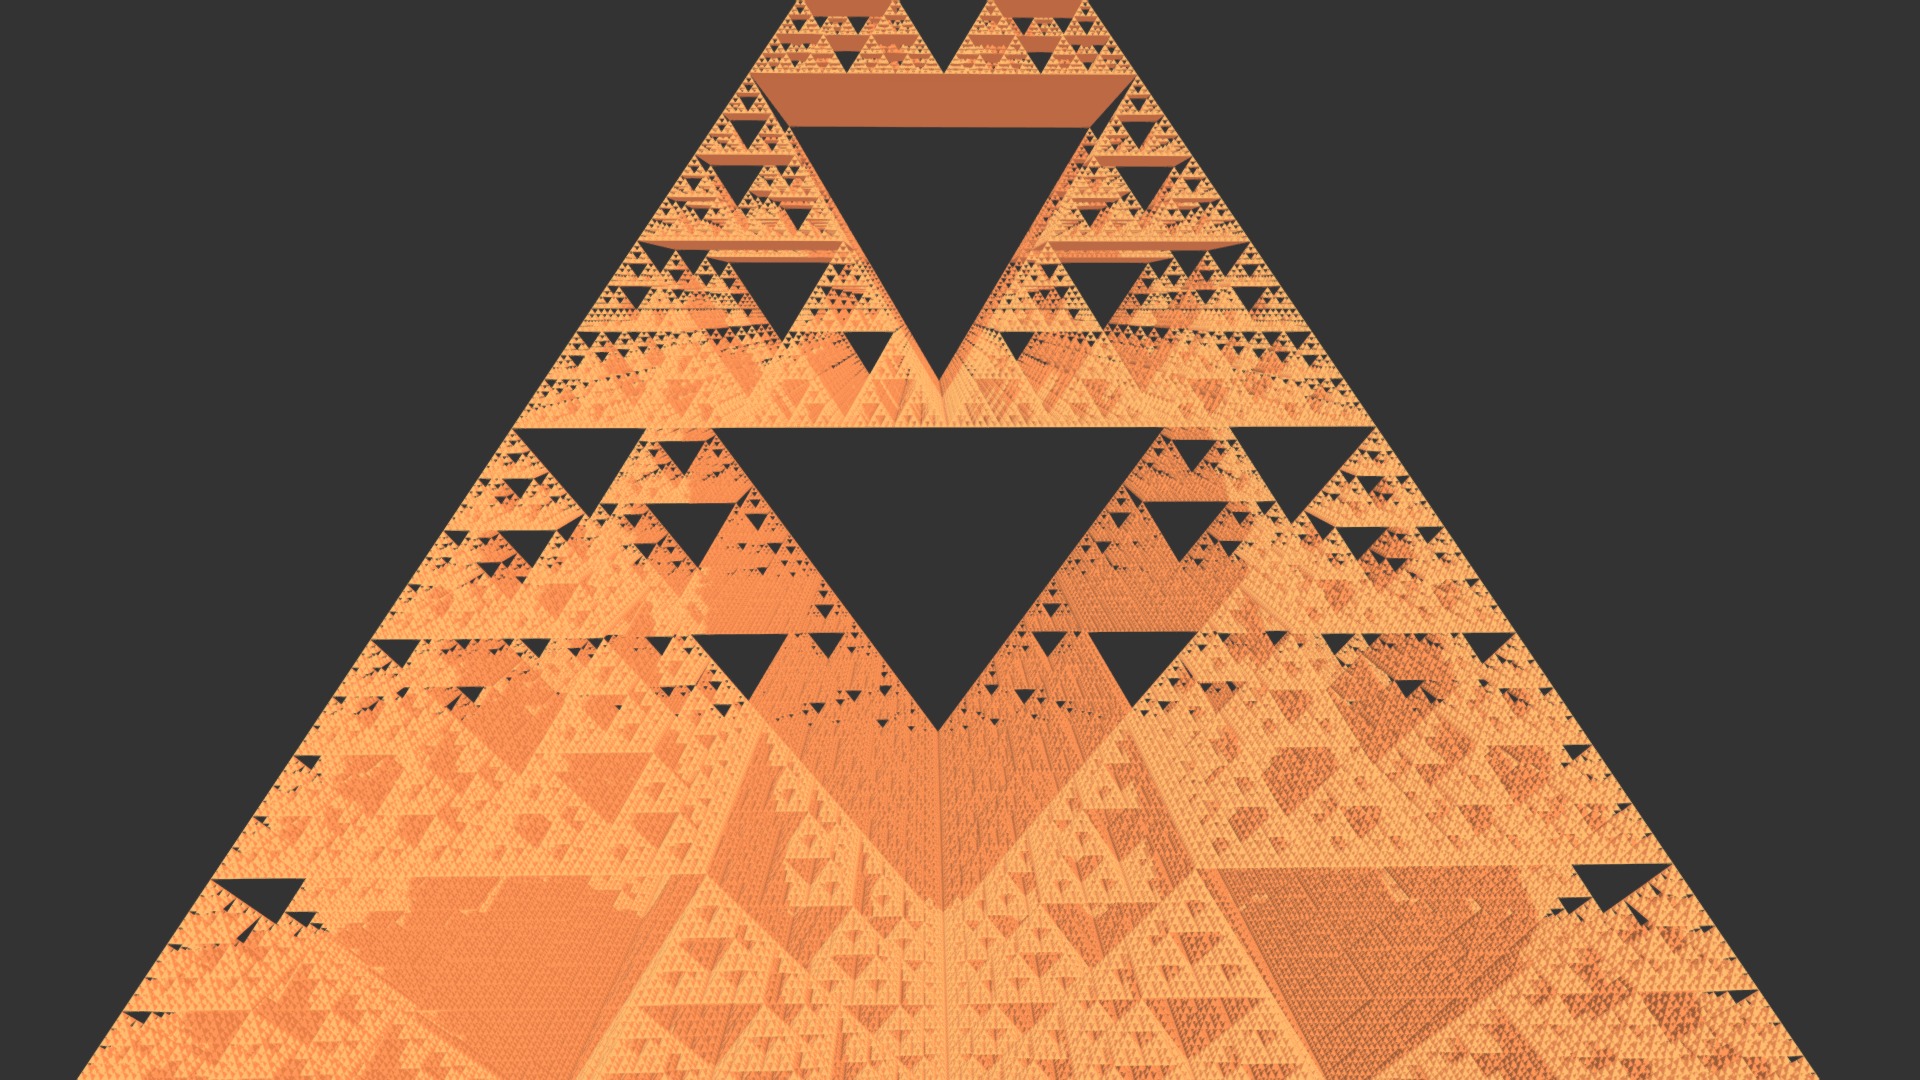 3D model Sierpinski gasket stage 8 - This is a 3D model of the Sierpinski gasket stage 8. The 3D model is about background pattern.